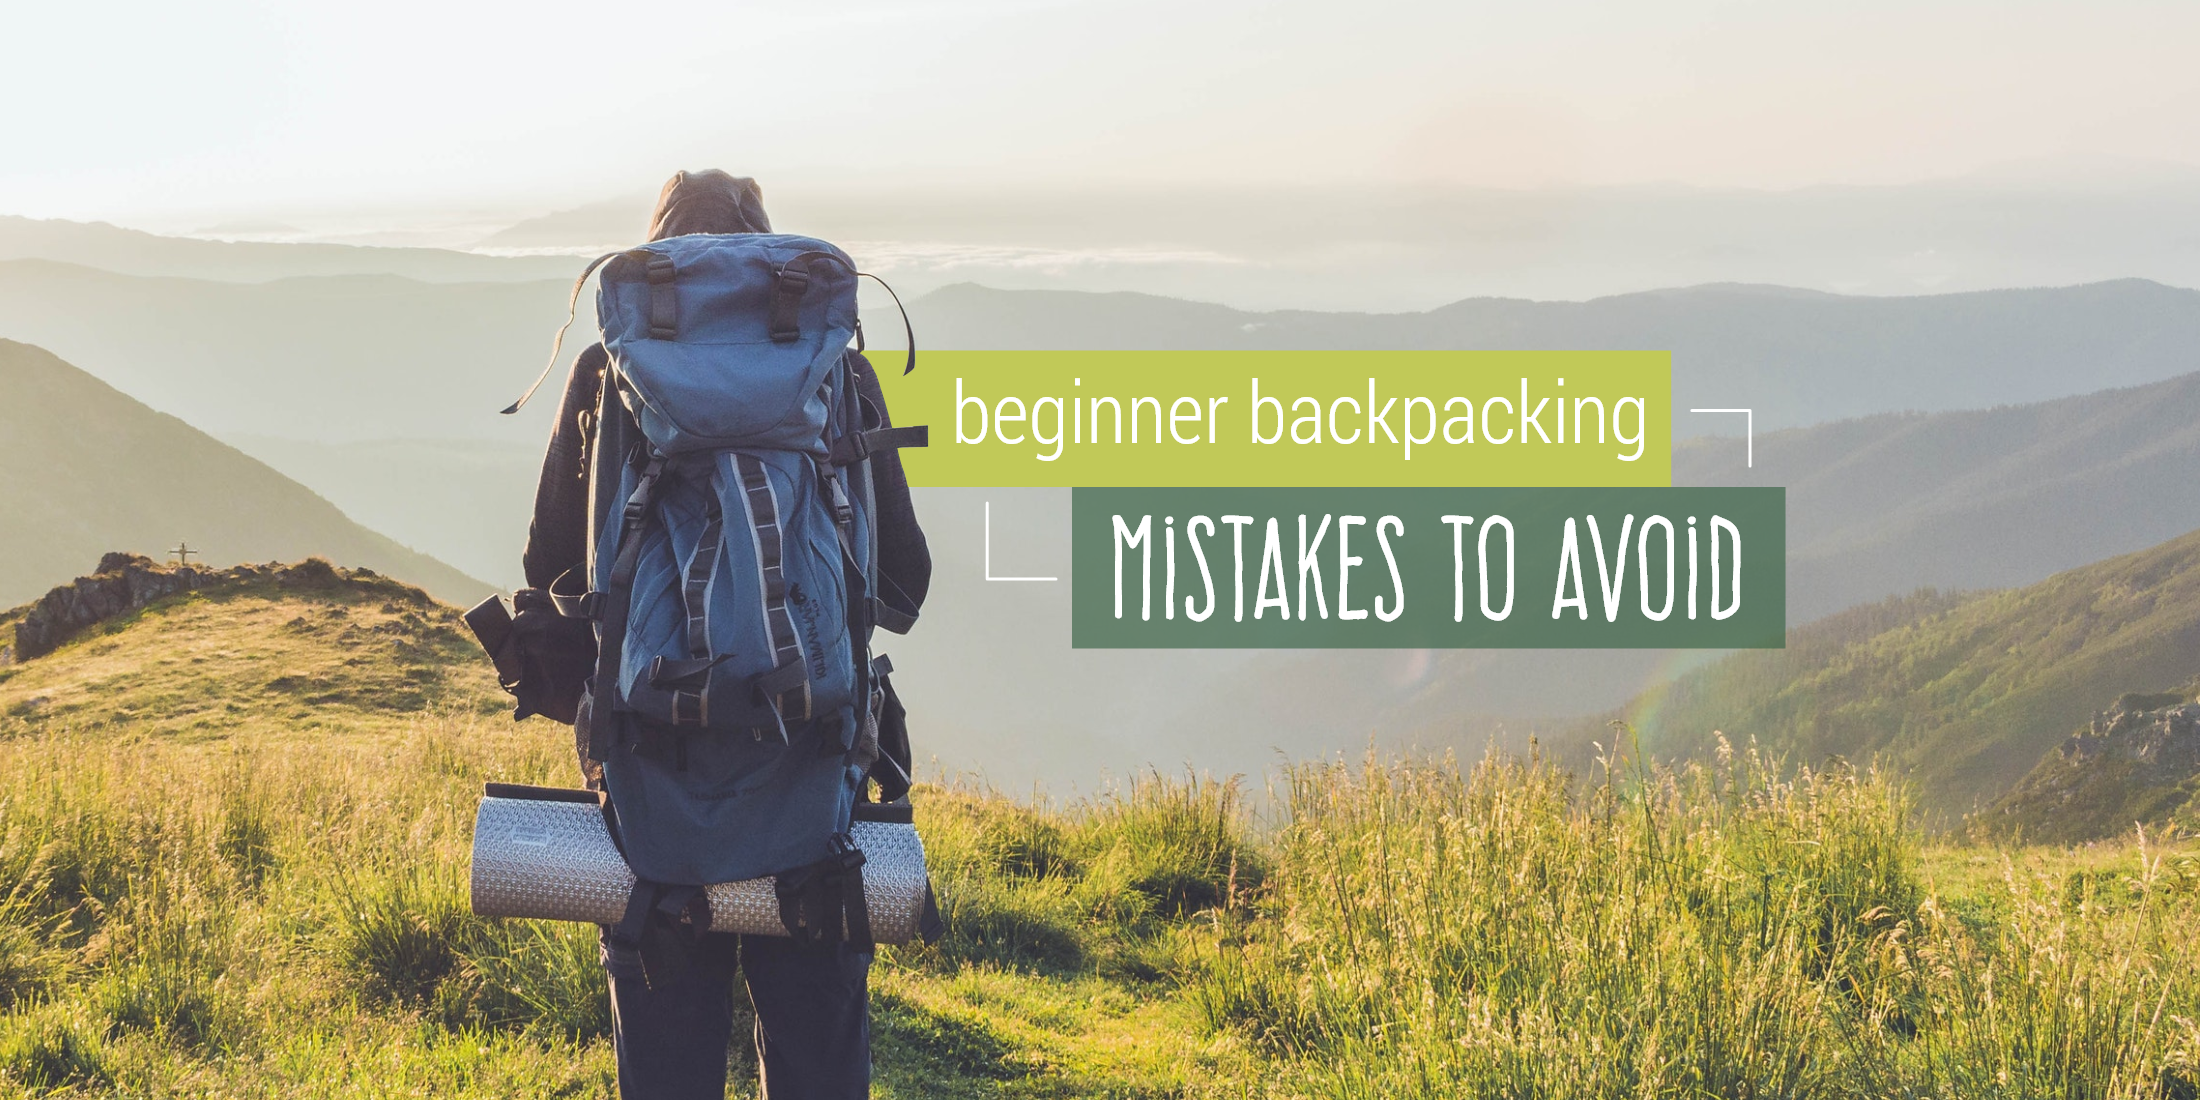 Backpacking for Beginners: Essential Skills You Need to Master to Avoid Common Beginner Backpacking Mistakes